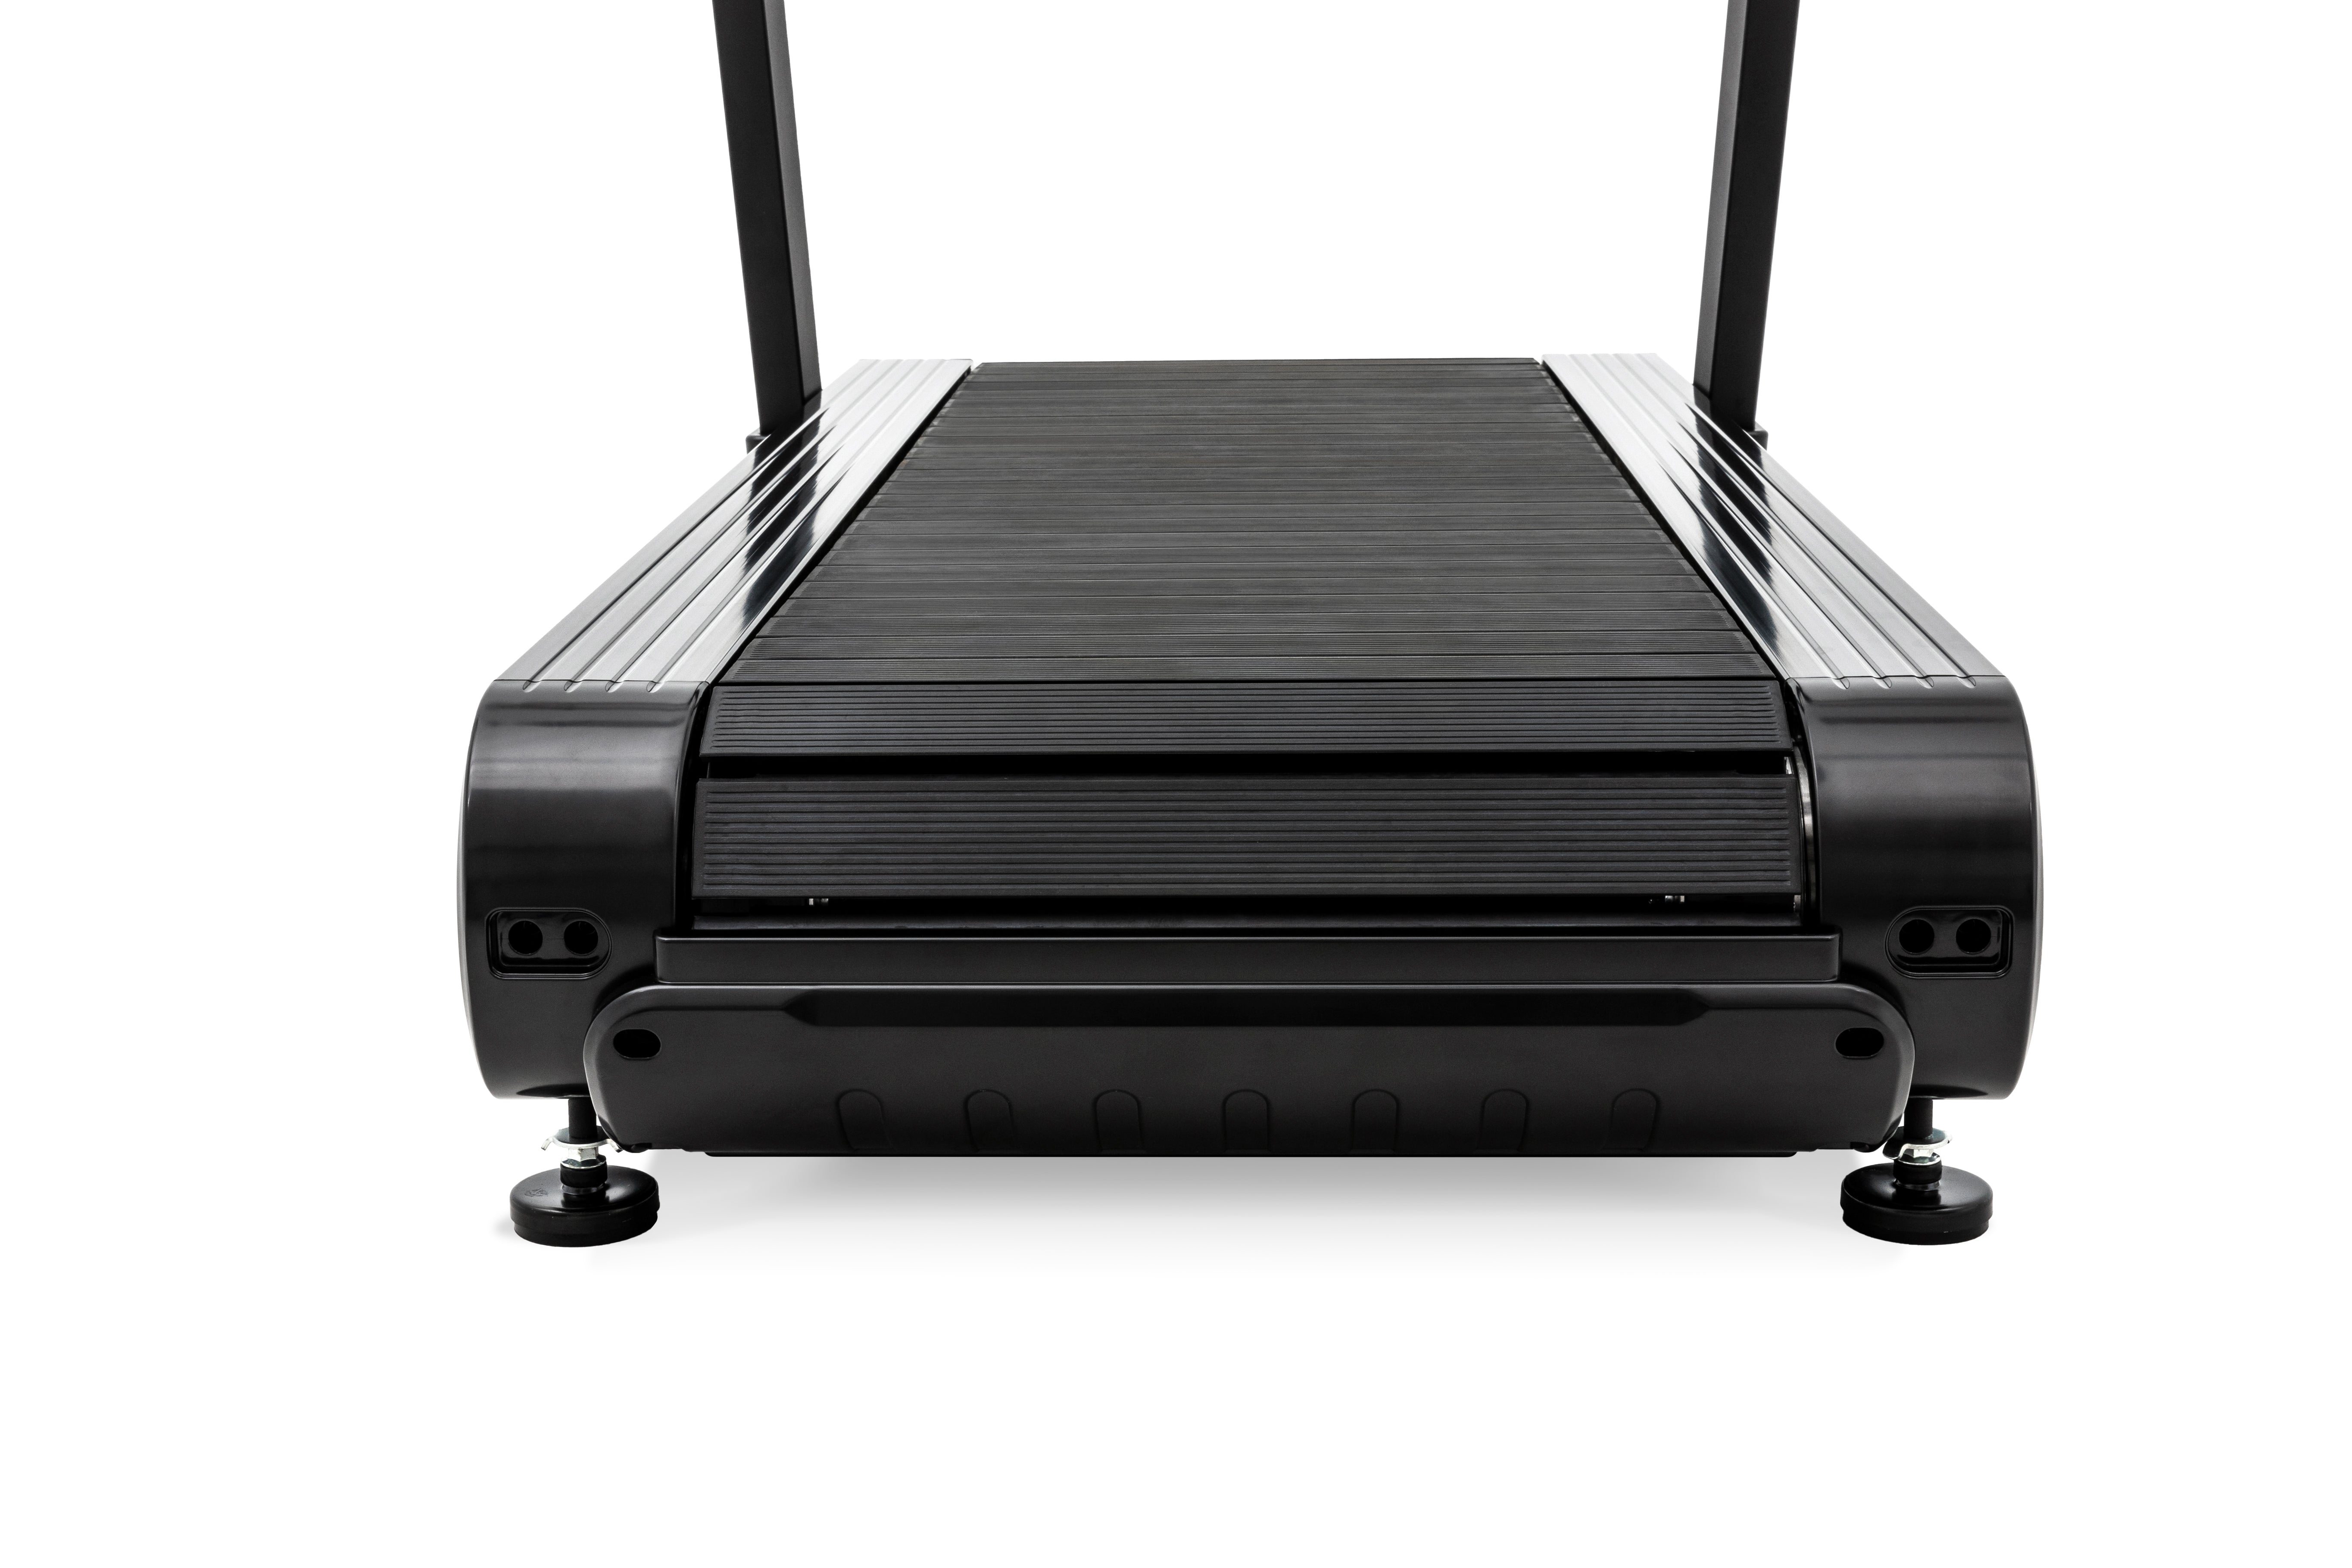 Close-up view of the Sole ST90 treadmill from the rear, showcasing its textured running belt, sleek black side panels, and stabilizing feet.